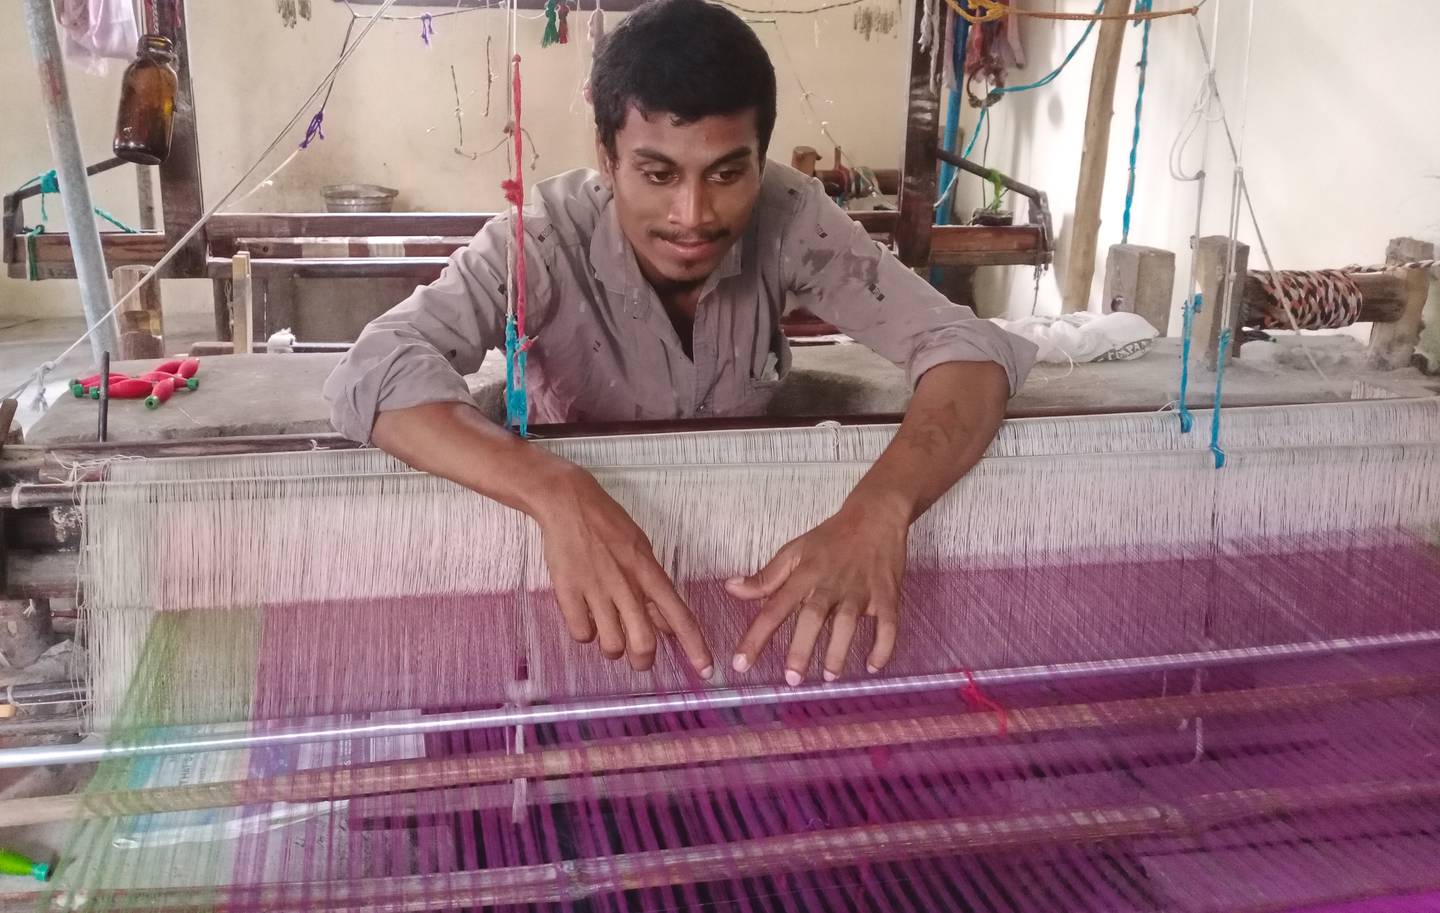 Operating a hand loom is an exacting process